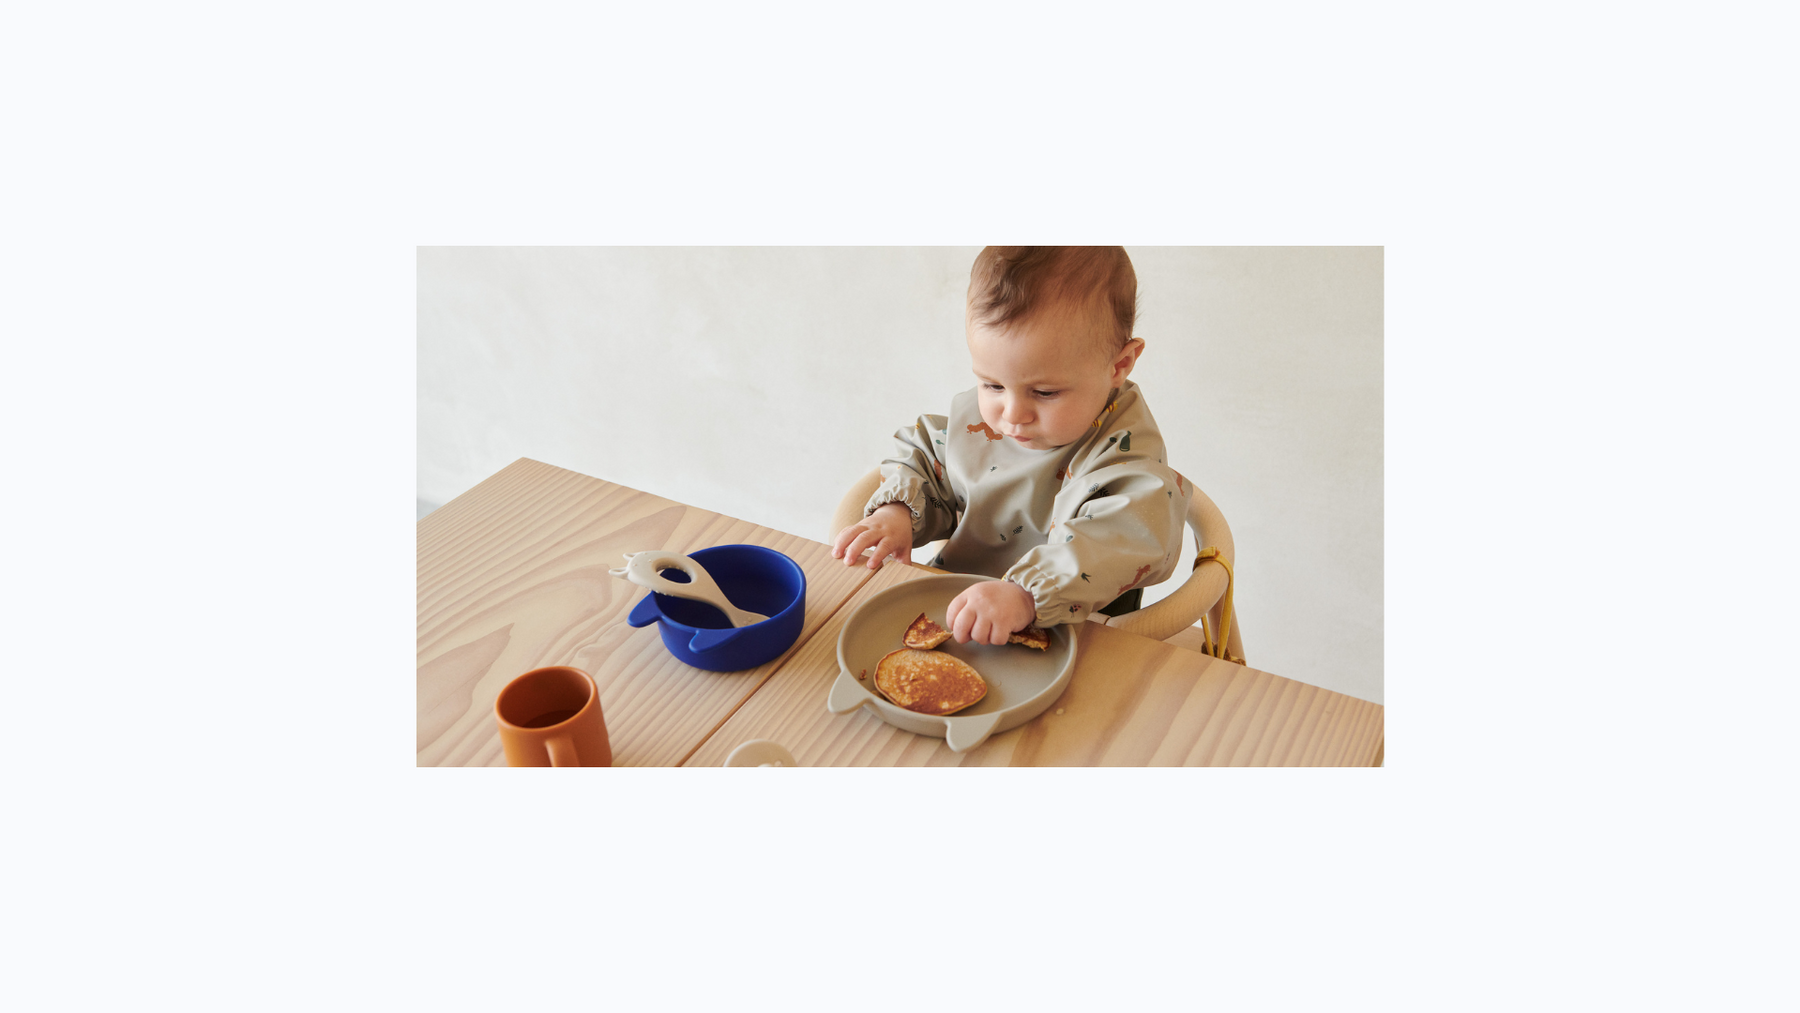 Baby's first meal: how to get the right equipment?